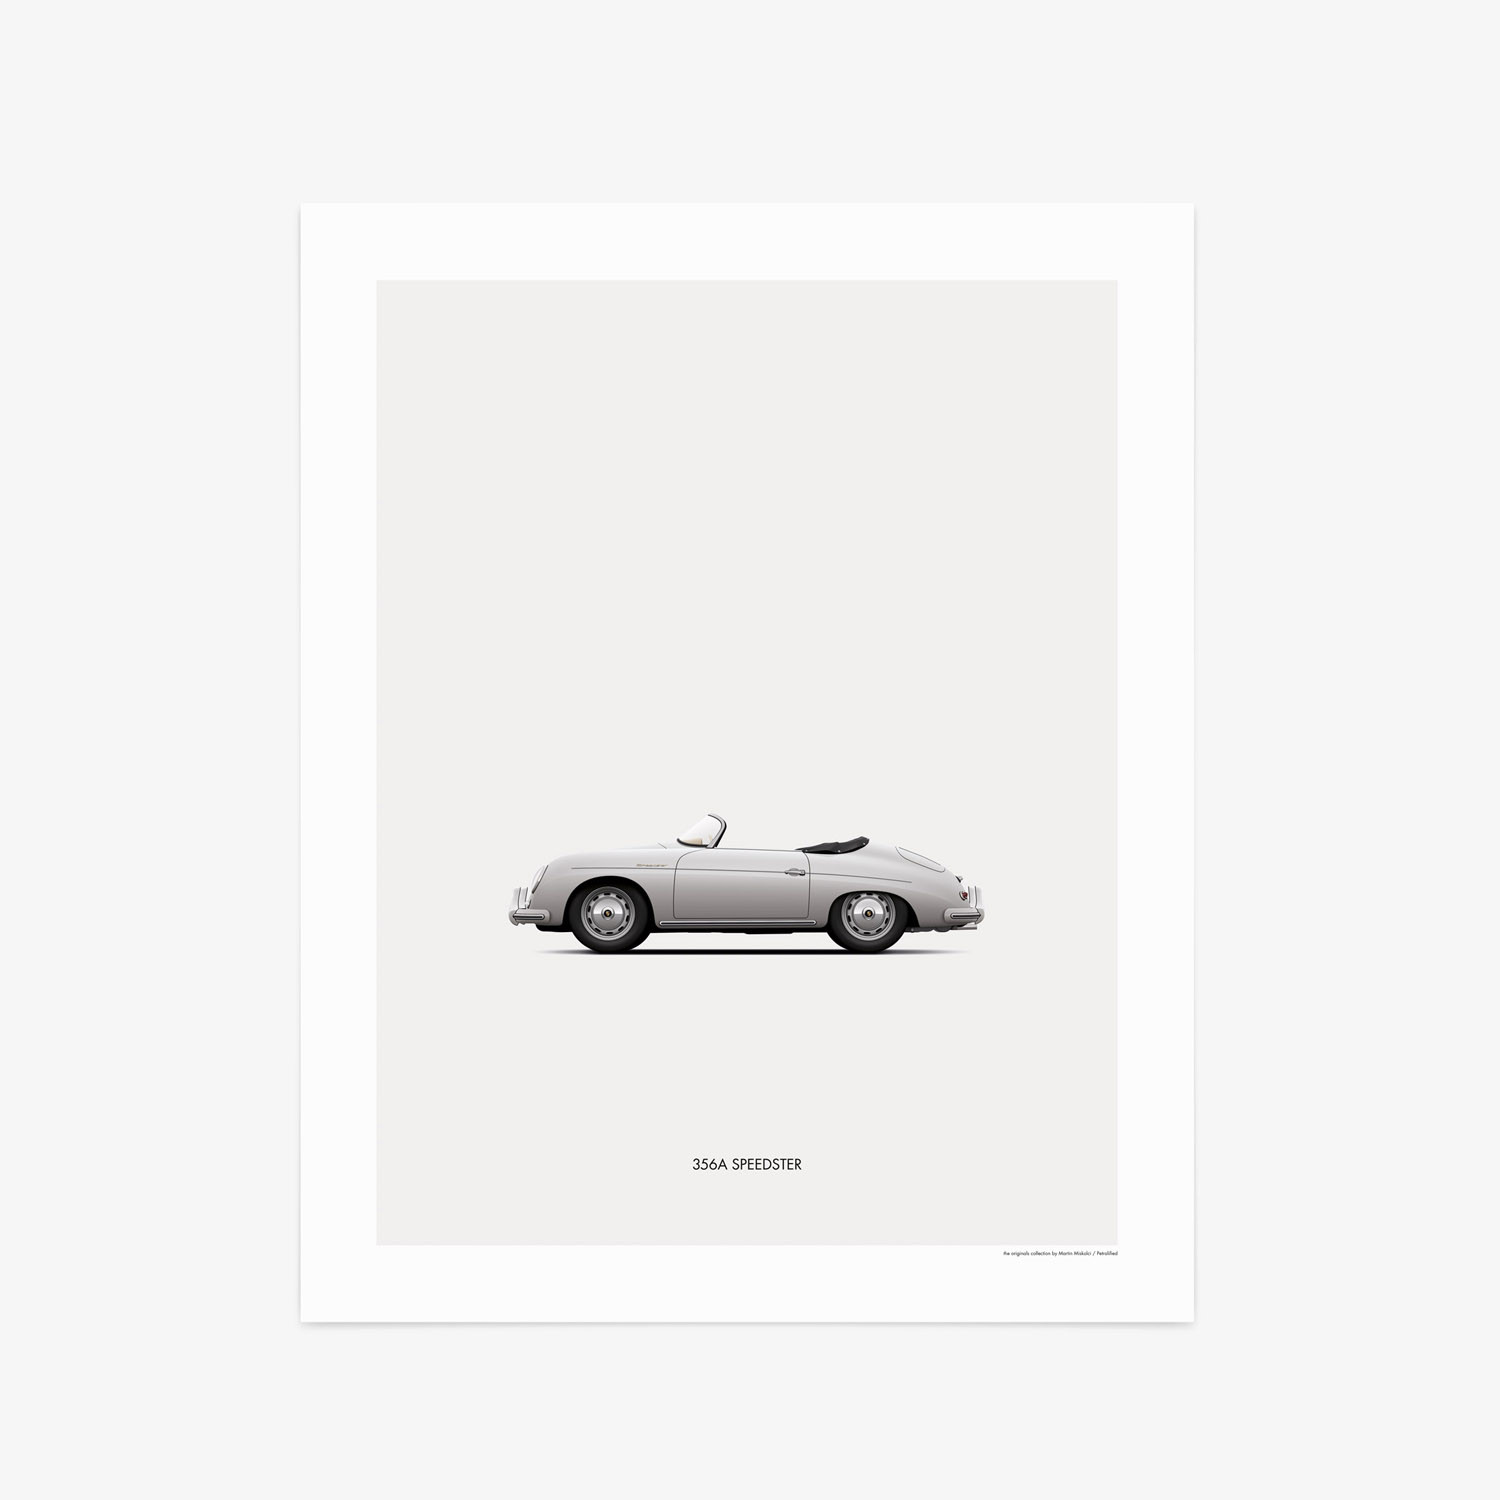 A Modern and Minimalist Approach to Classic Car Prints